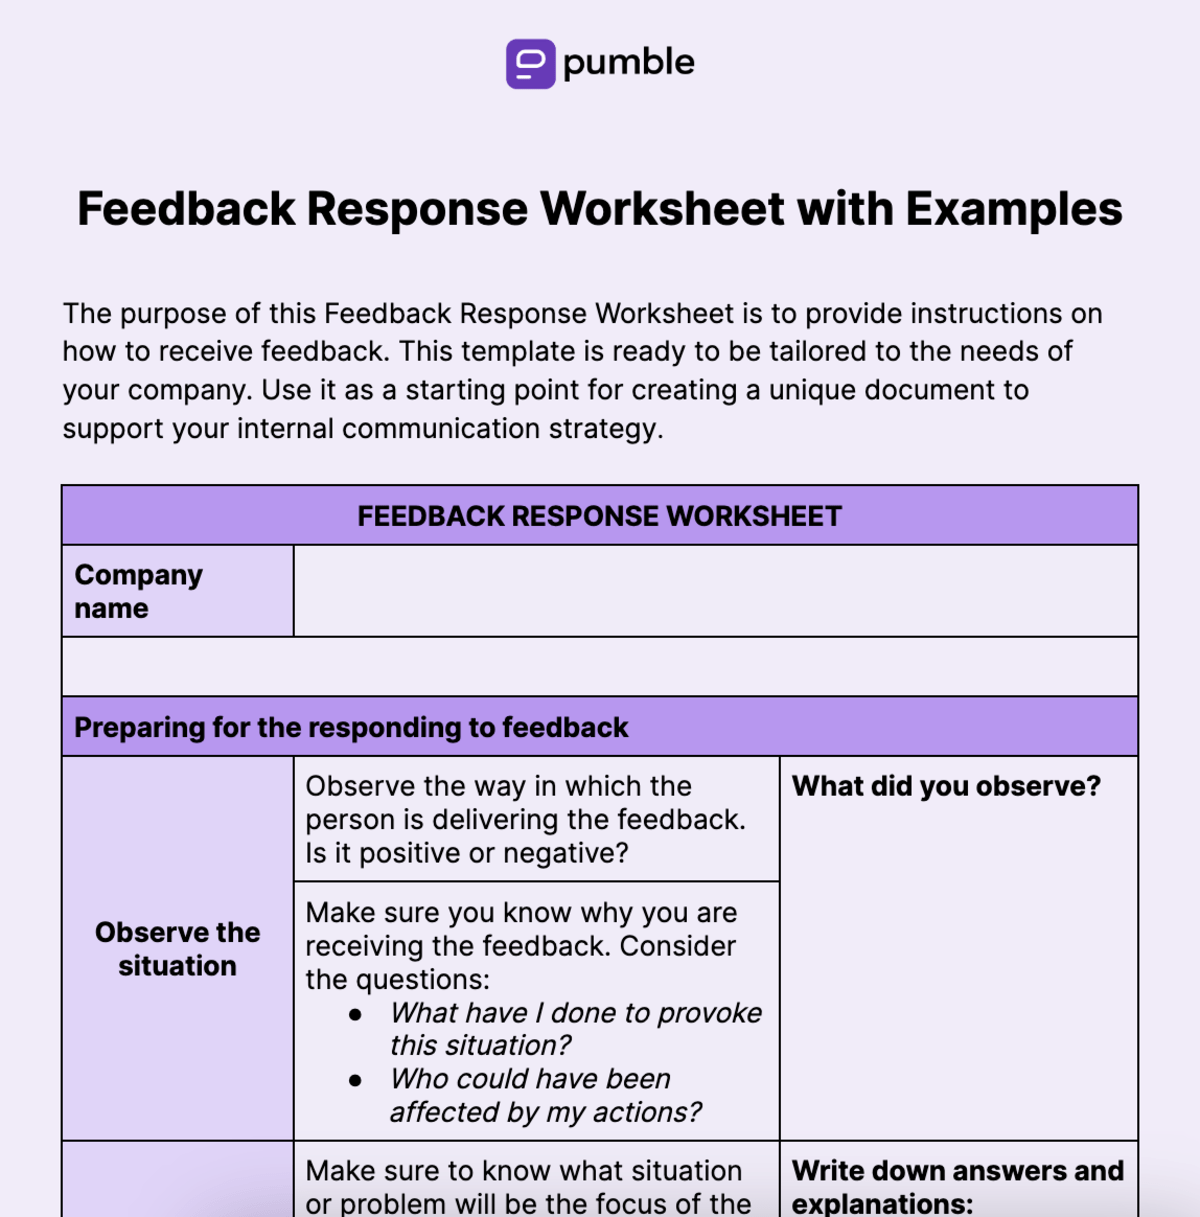 Feedback Response Worksheet with Examples